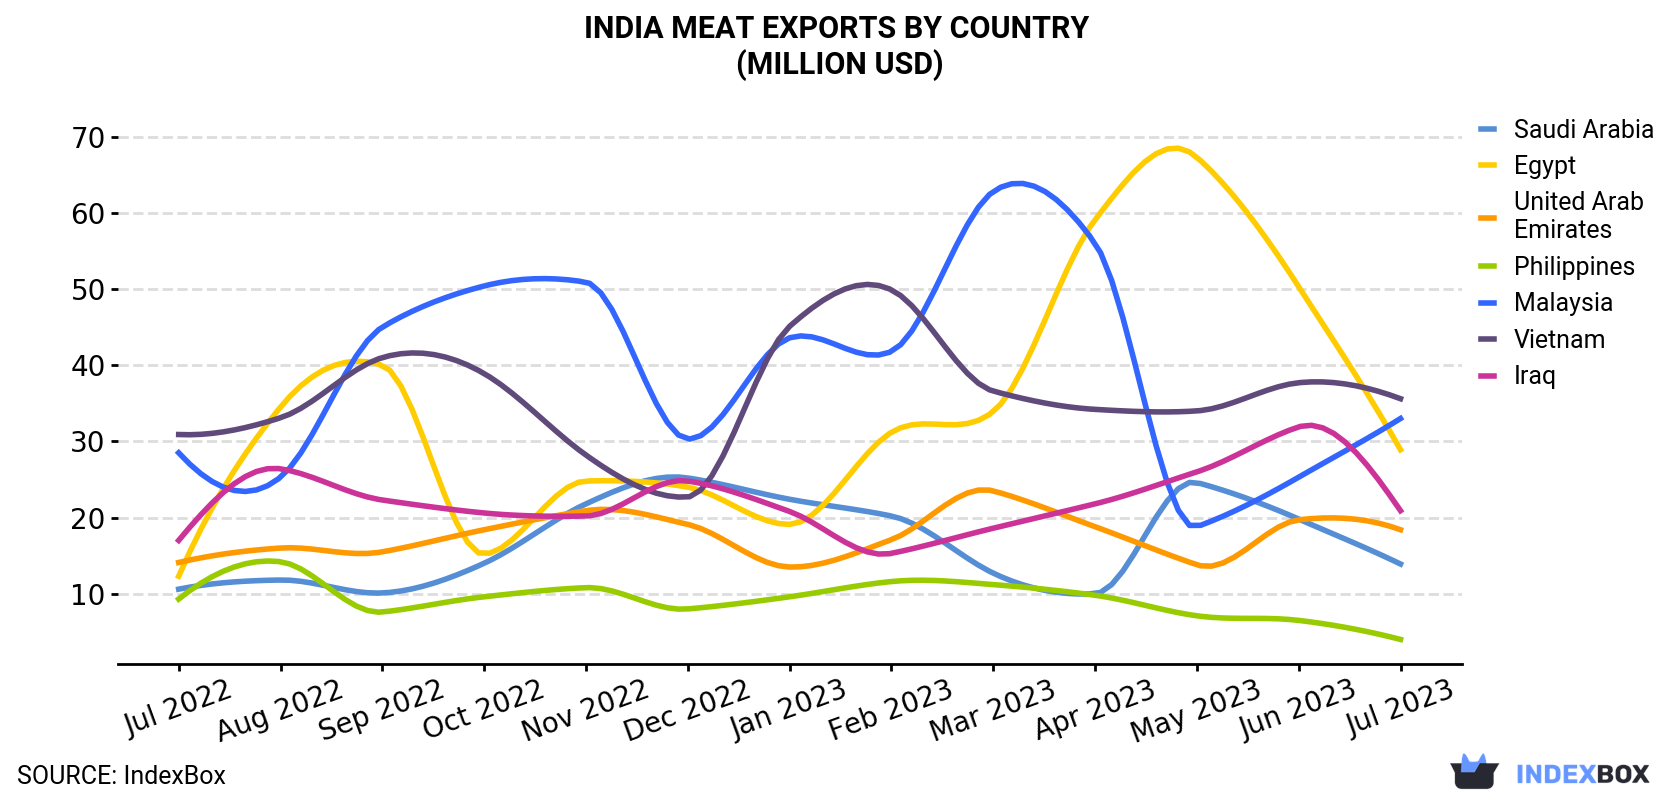 India Meat Exports By Country (Million USD)